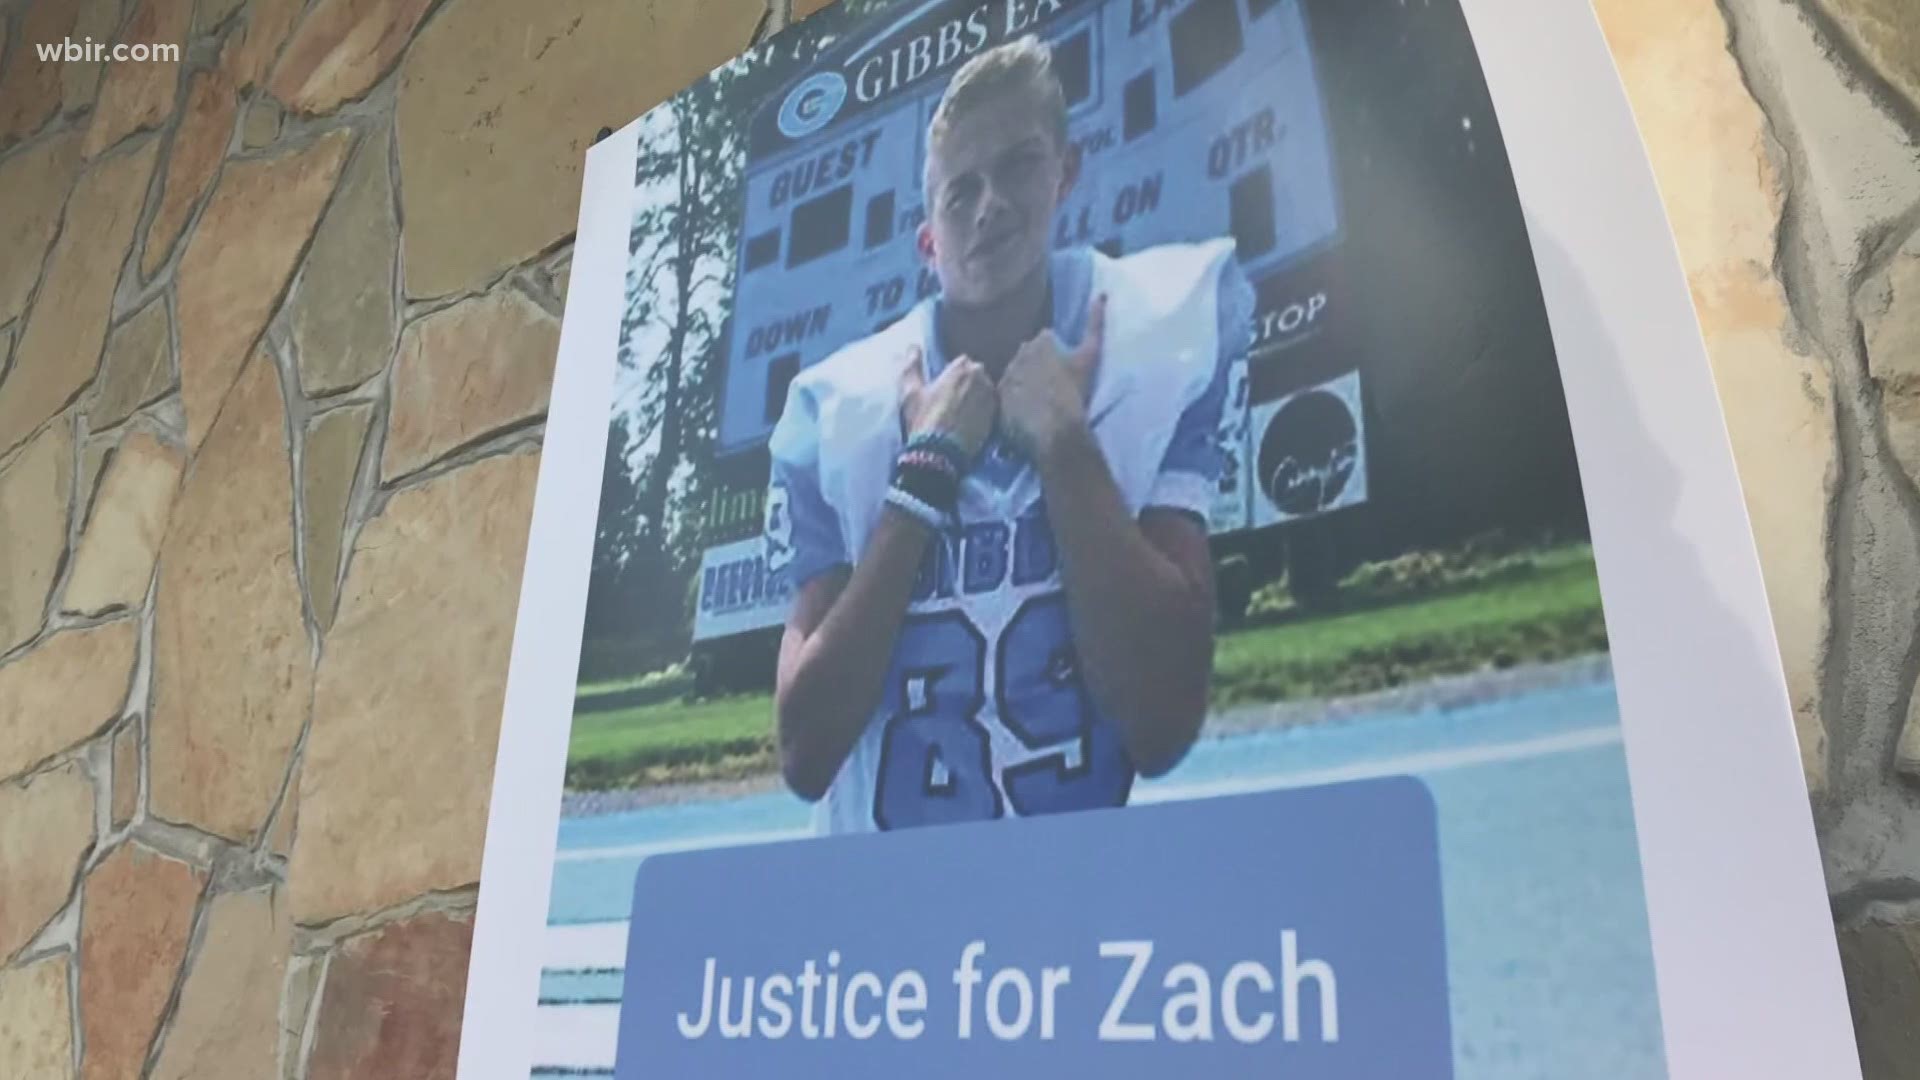 The community gathered today to remember Zach's life and honor his legacy.